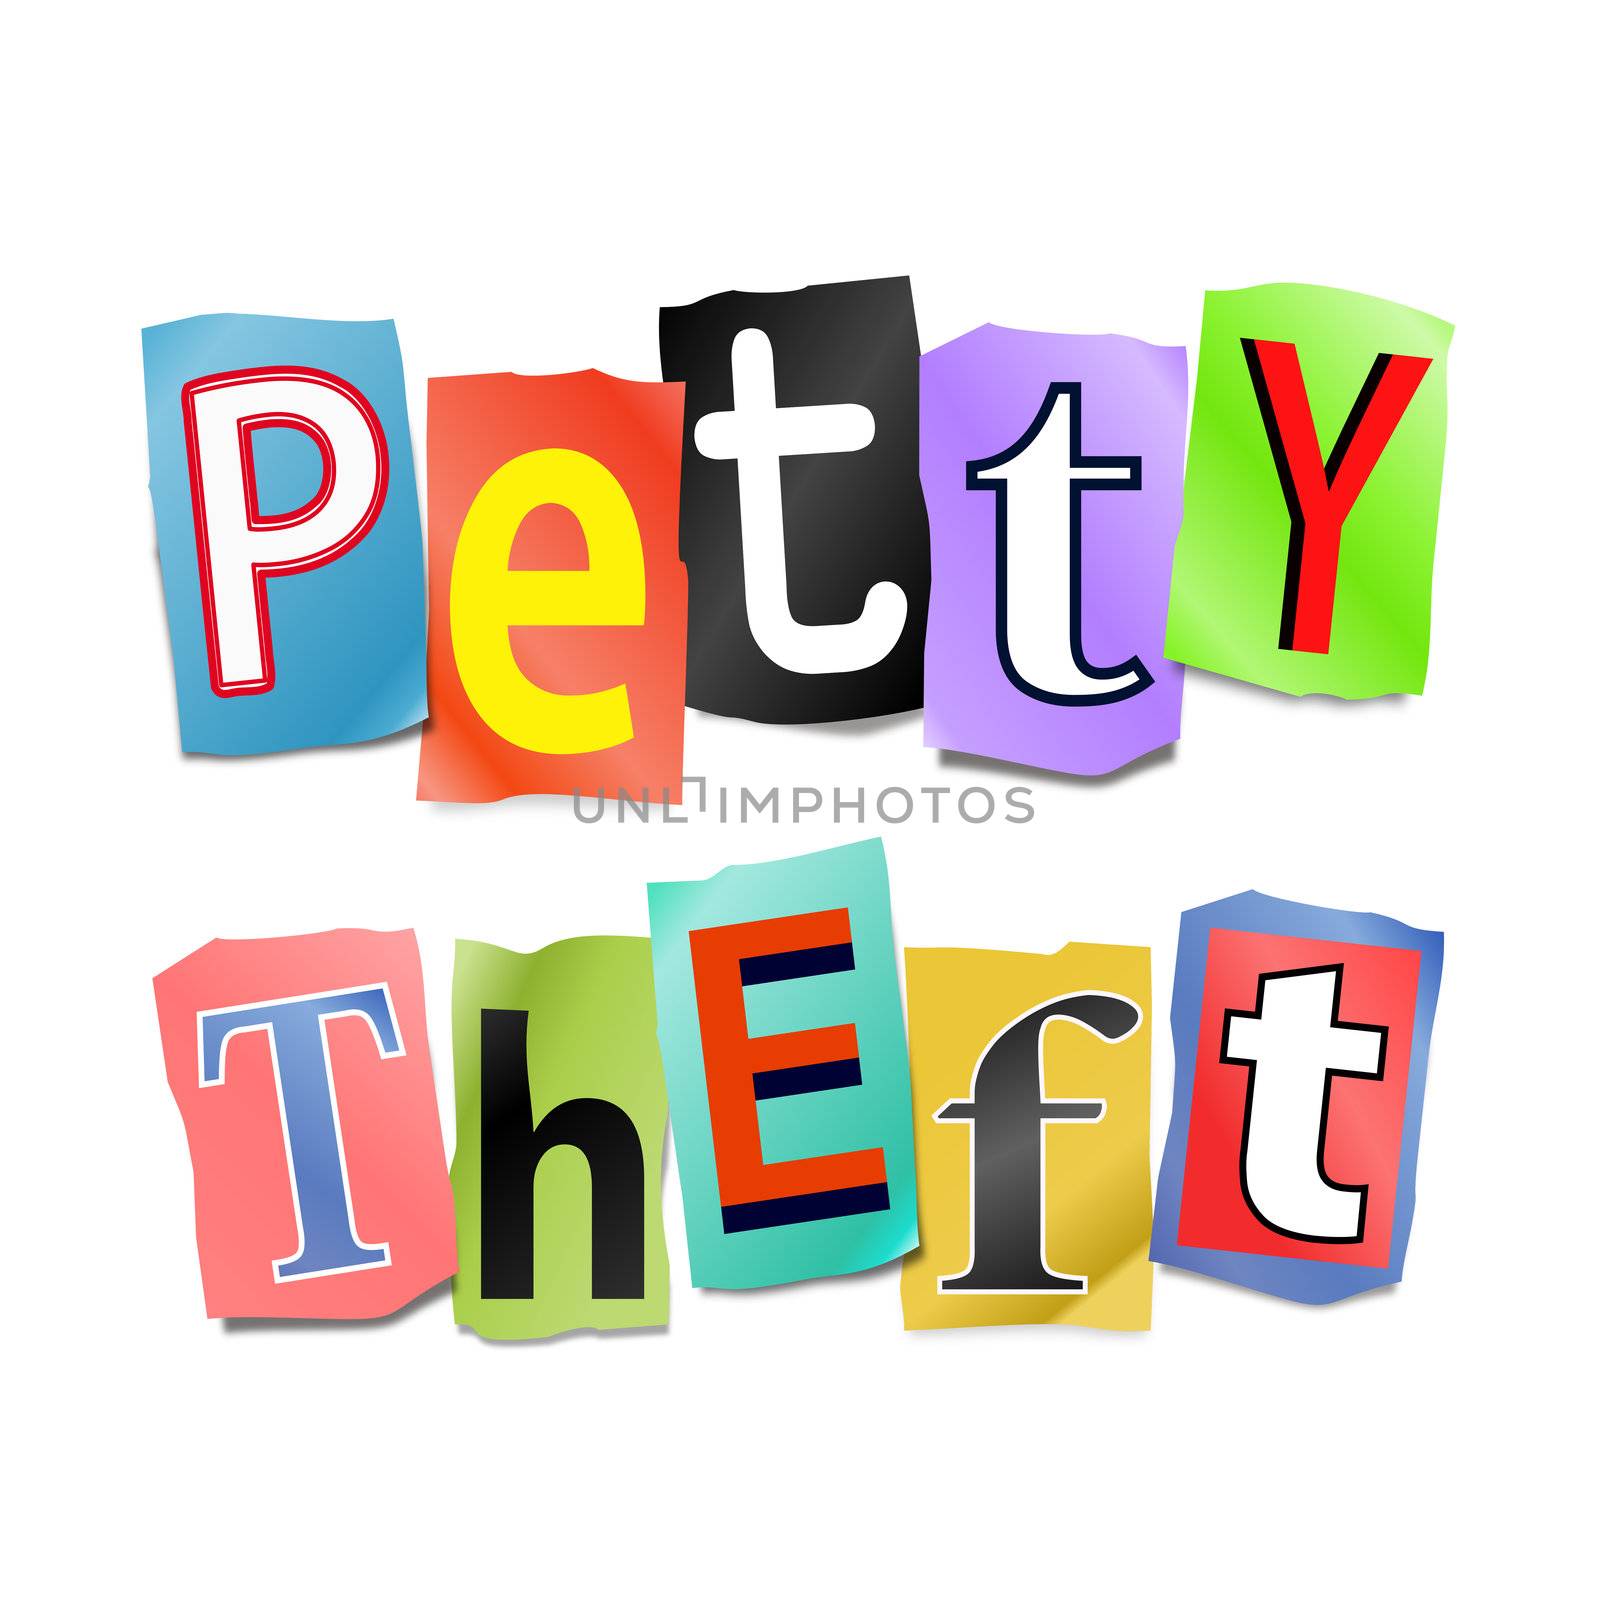 Illustration depicting cutout printed letters arranged to form the words petty theft.